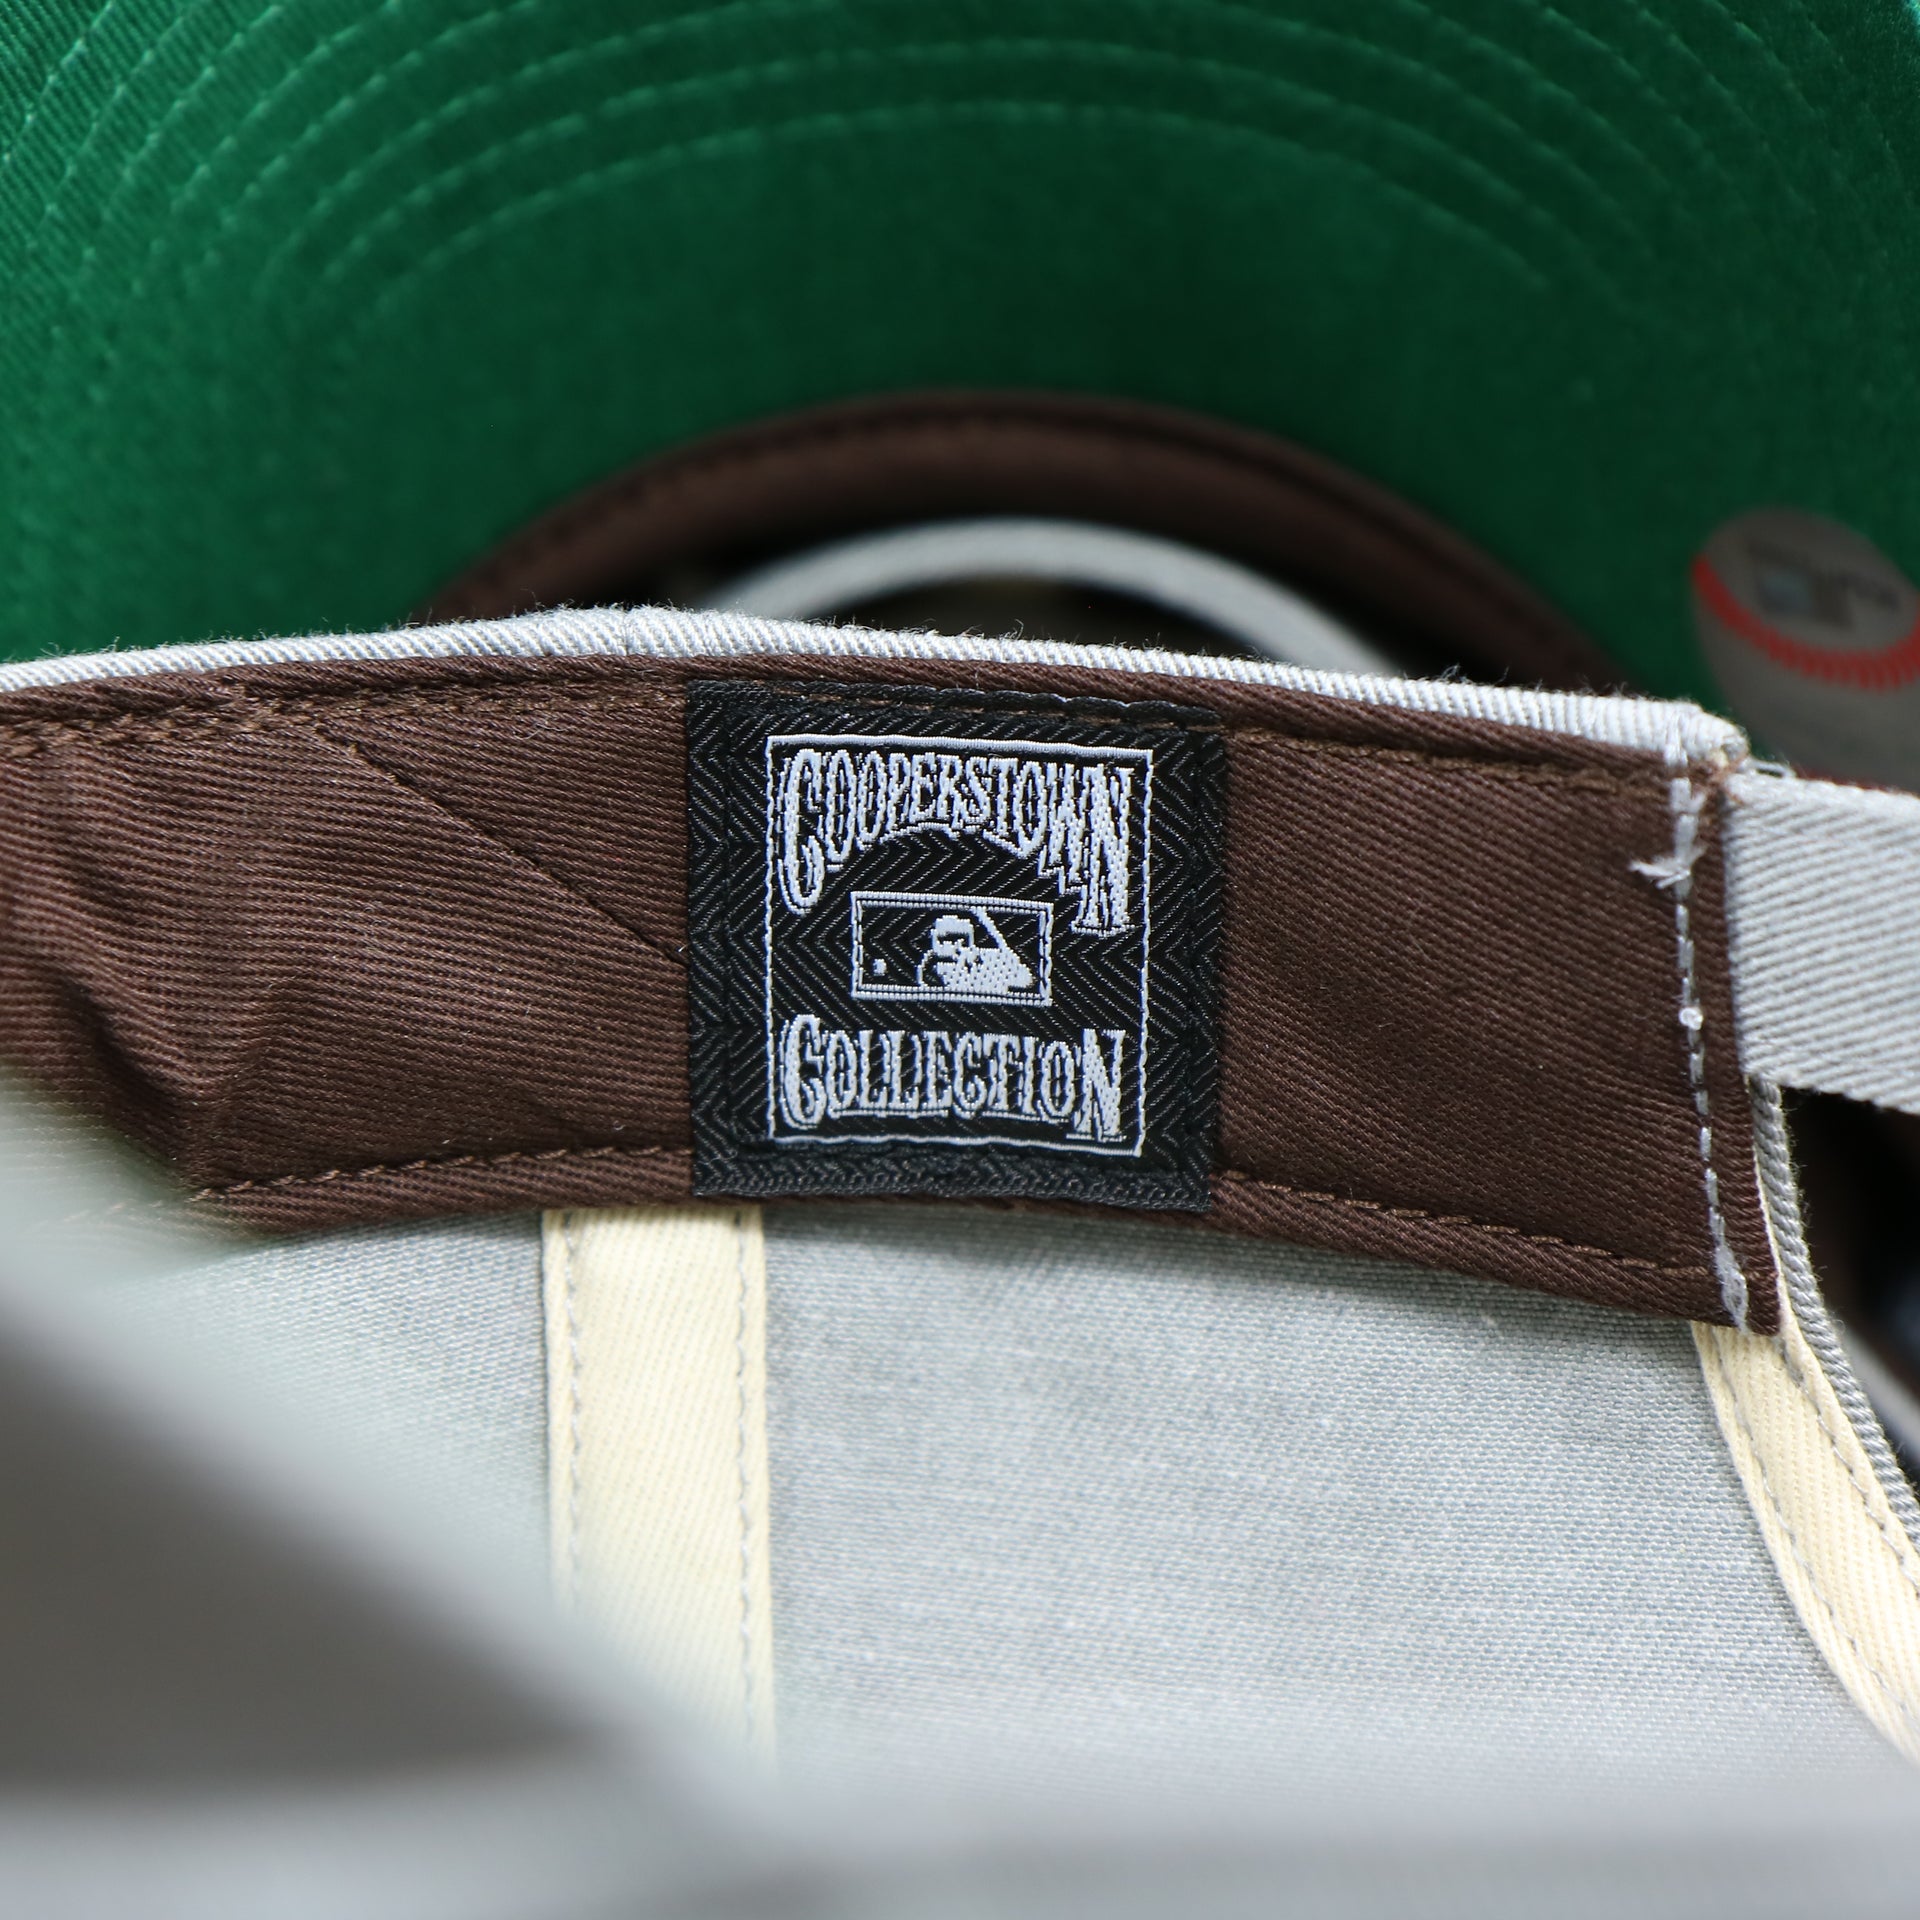 The Cooperstown Collection Tag on the Cooperstown Phillies Logo Green Bottom Philadelphia Phillies Dad Hat | Gray Dad Hat